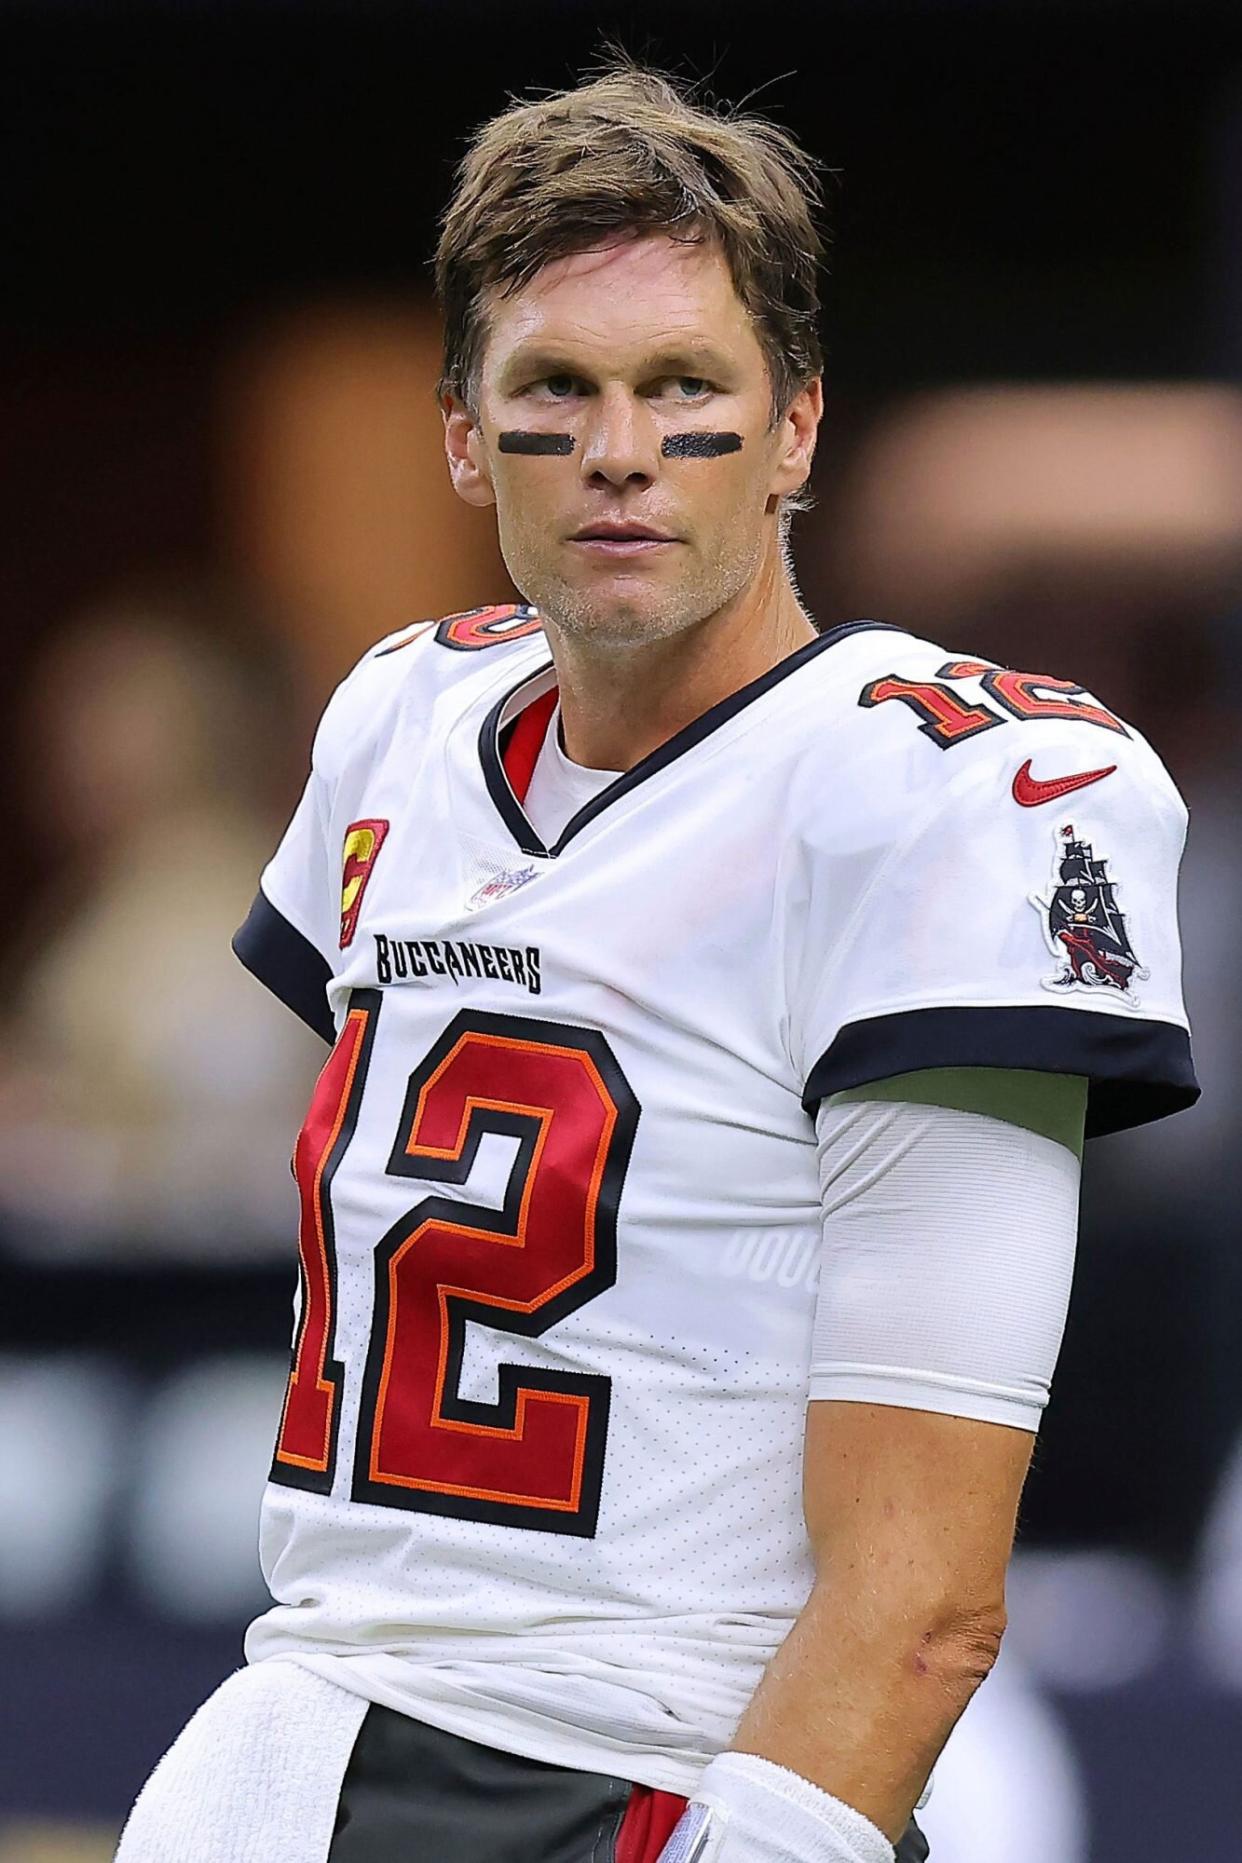 Mandatory Credit: Photo by Jonathan Bachman/AP/Shutterstock (13400496f) Tampa Bay Buccaneers quarterback Tom Brady (12) warms up before an NFL football game against the New Orleans Saints, in New Orleans Buccaneers Saints Football, New Orleans, United States - 18 Sep 2021